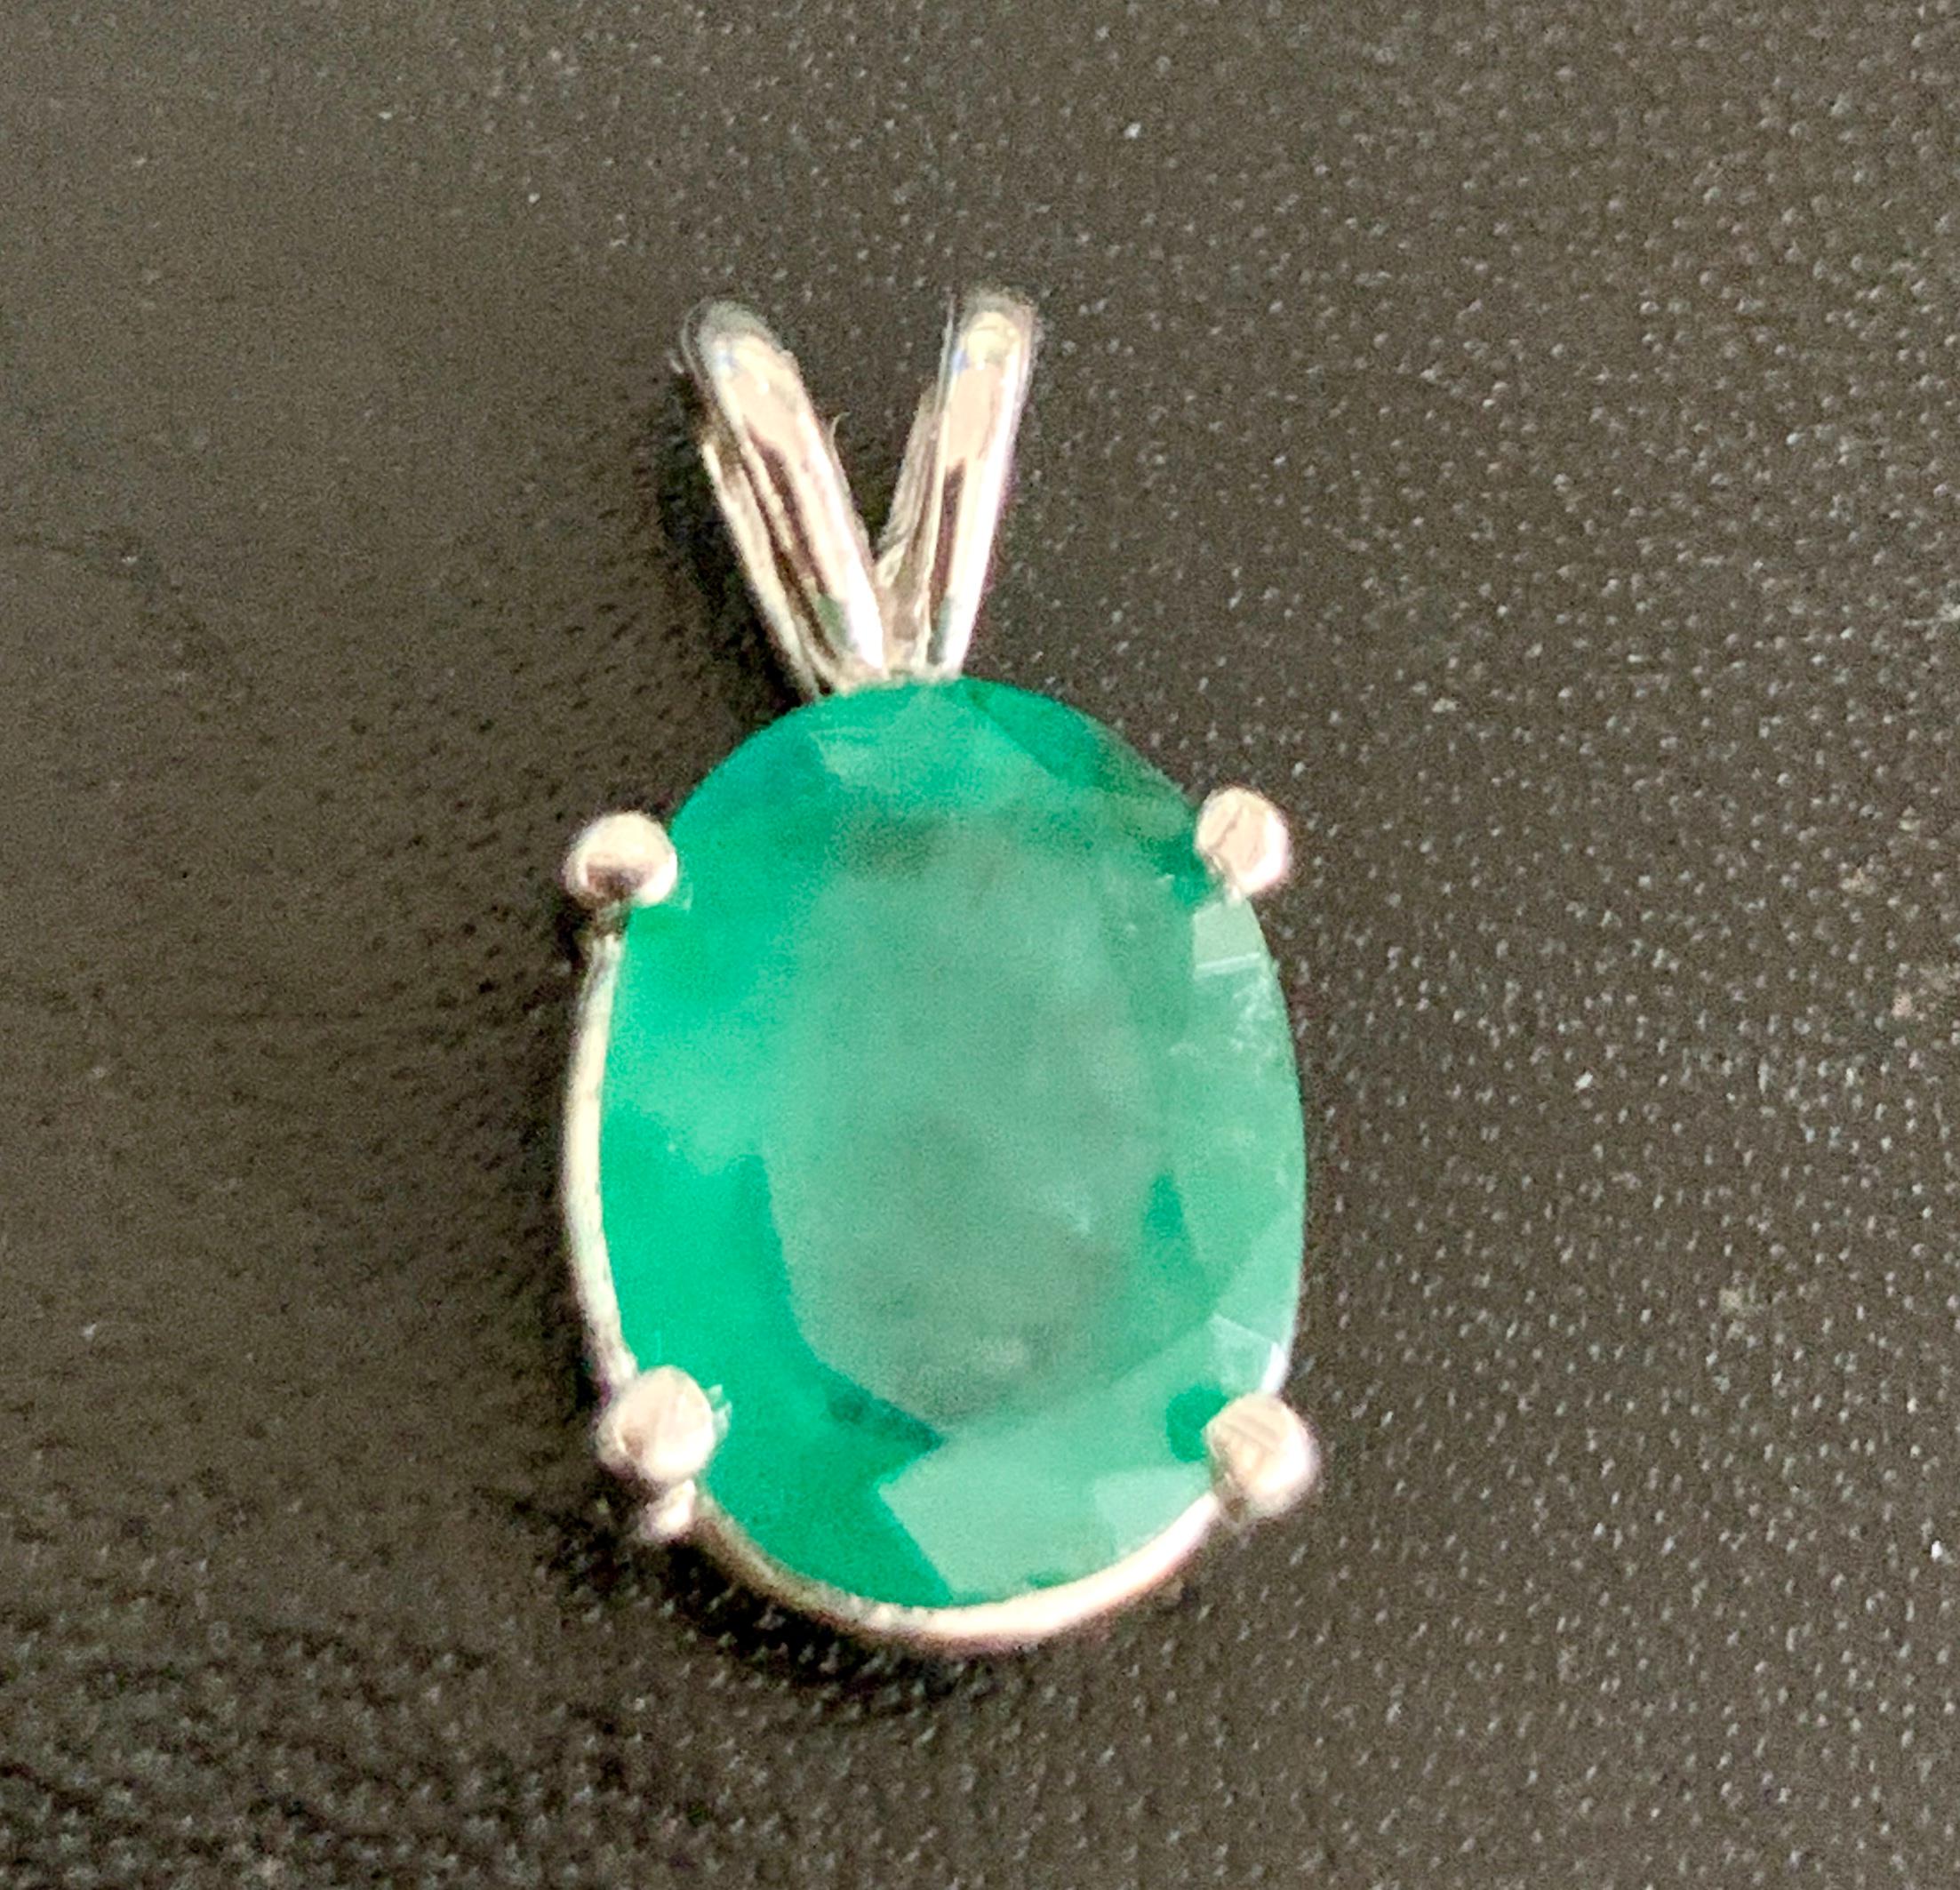 Approximately 2.5 Carat Oval Shape Emerald Pendant / Necklace 14 Karat White  Gold With Chain
This Simple yet elegant Necklace consisting of a single oval shape emerald with a solid 14 Karat White gold chain
Measurement of the stone roughly